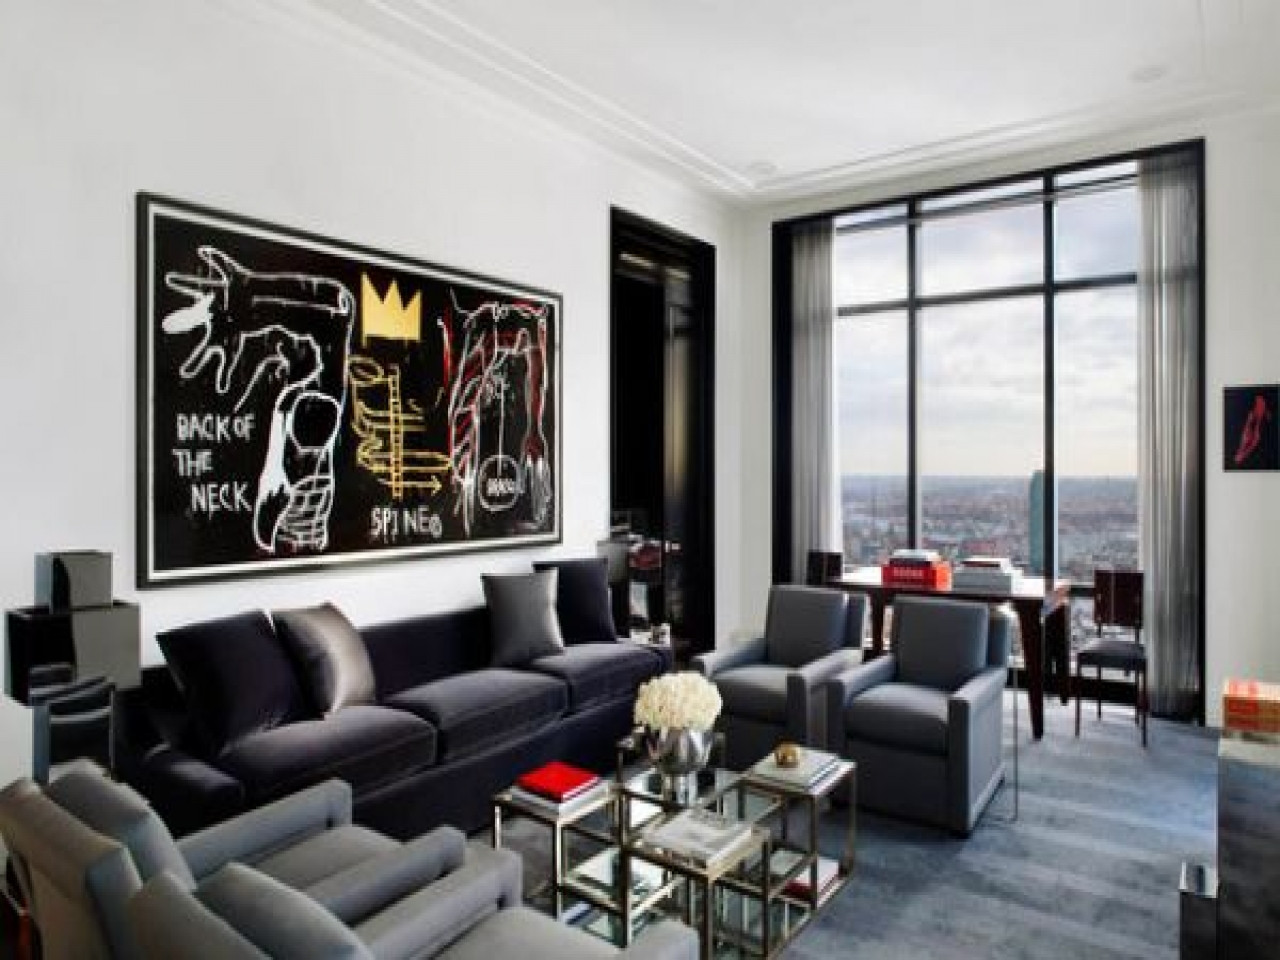 Unique Bachelorette Party Ideas Nyc
 Unique wall art and decor small bachelor pad living room